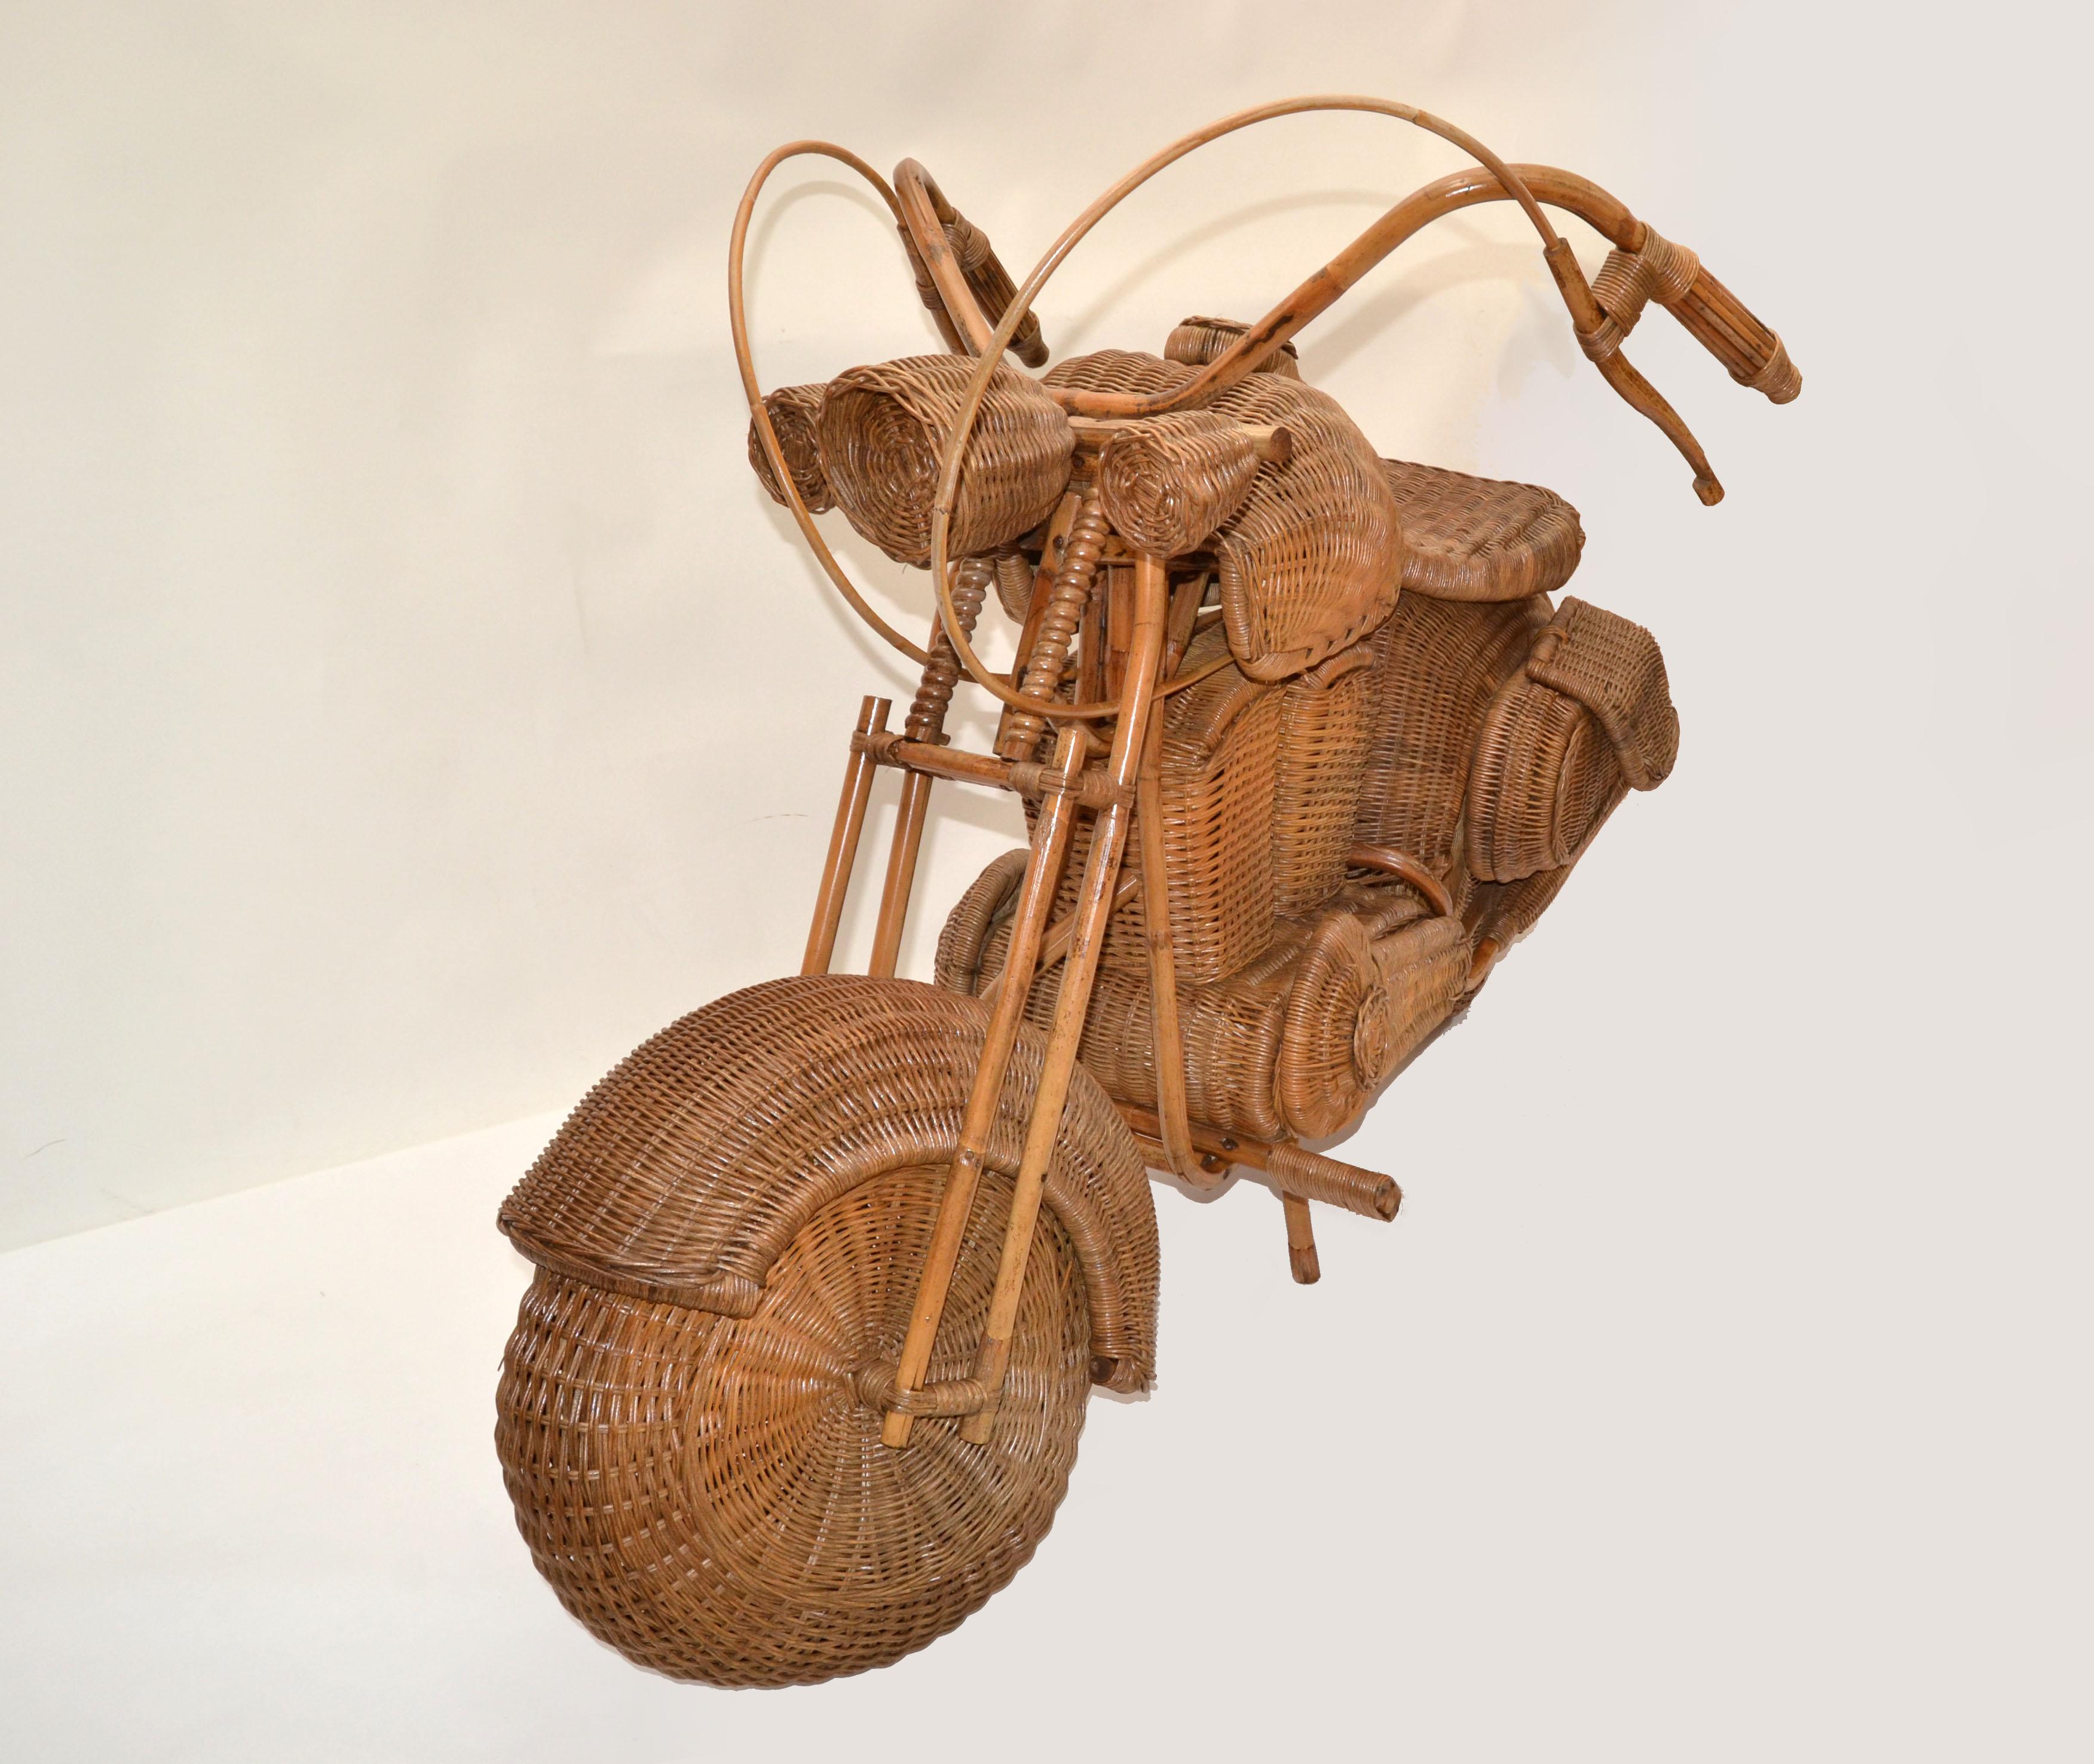 French Tom Dixon For Habitat Stores Wicker Life-size Harley Davidson Sculpture For Sale